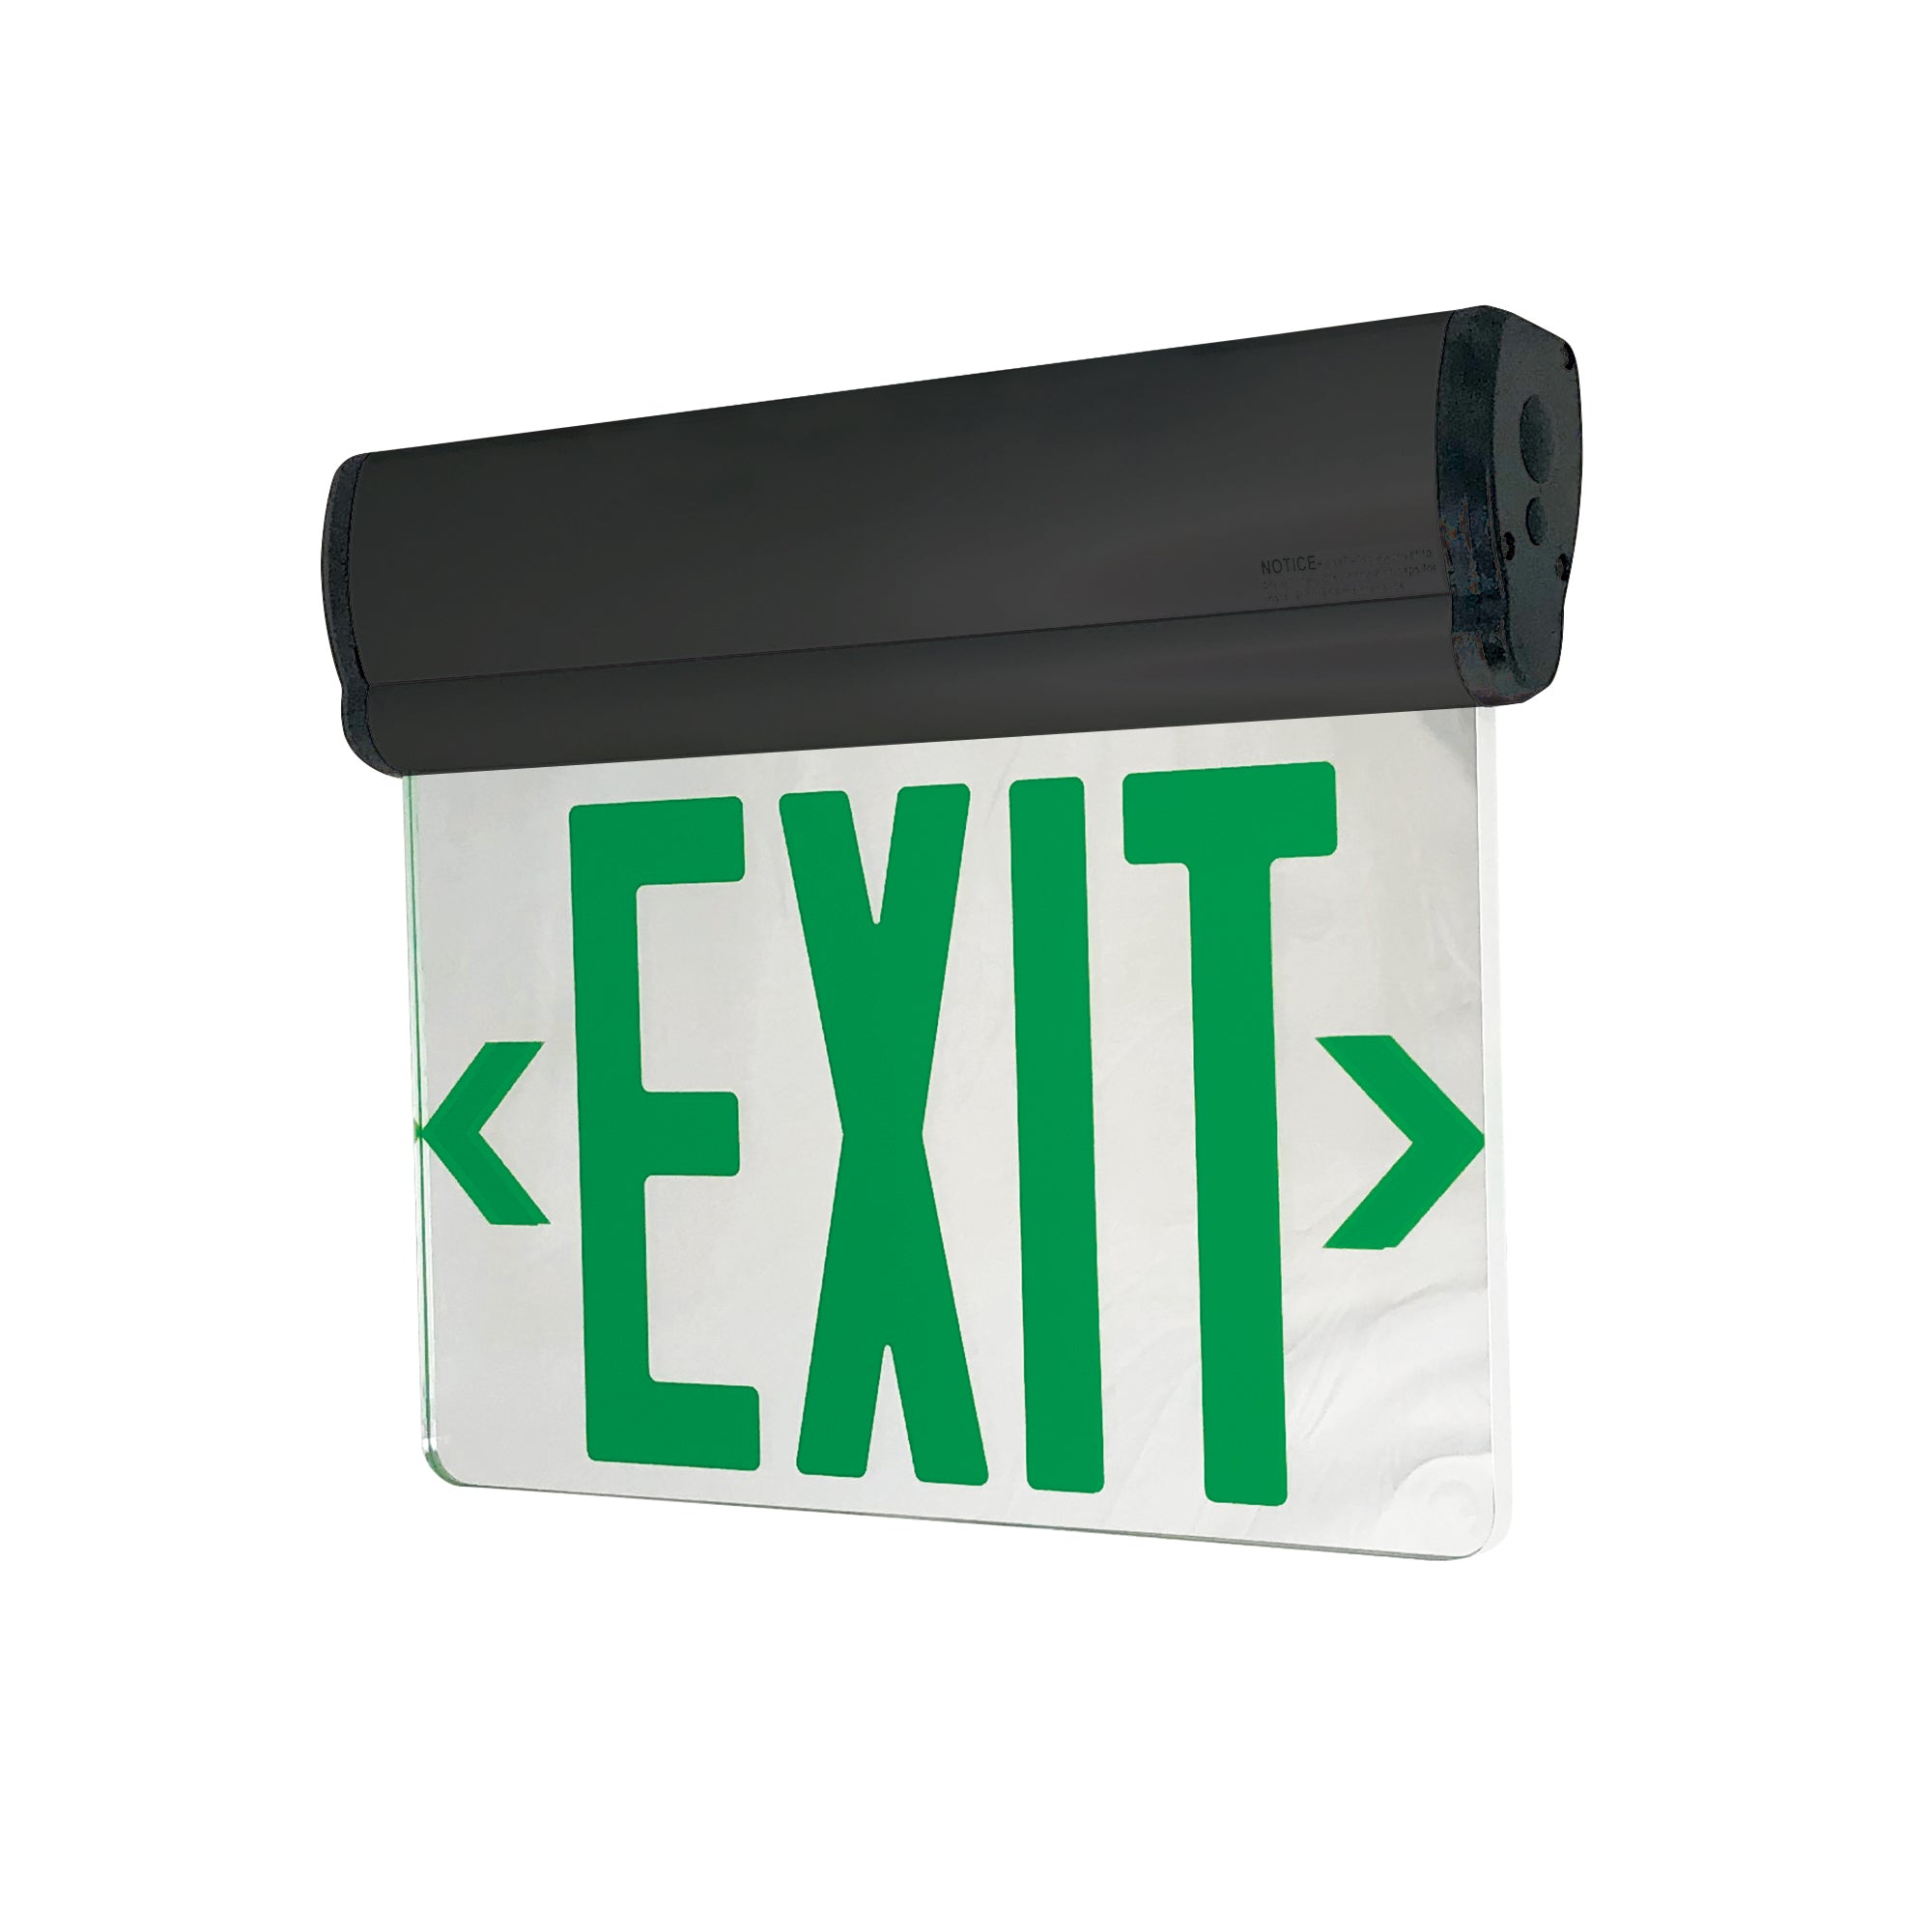 Nora Lighting NX-811-LEDG2MB - Exit / Emergency - Surface Adjustable LED Edge-Lit Exit Sign, 2 Circuit, 6 Inch Green Letters, Double Face / Mirrored Acrylic, Black Housing